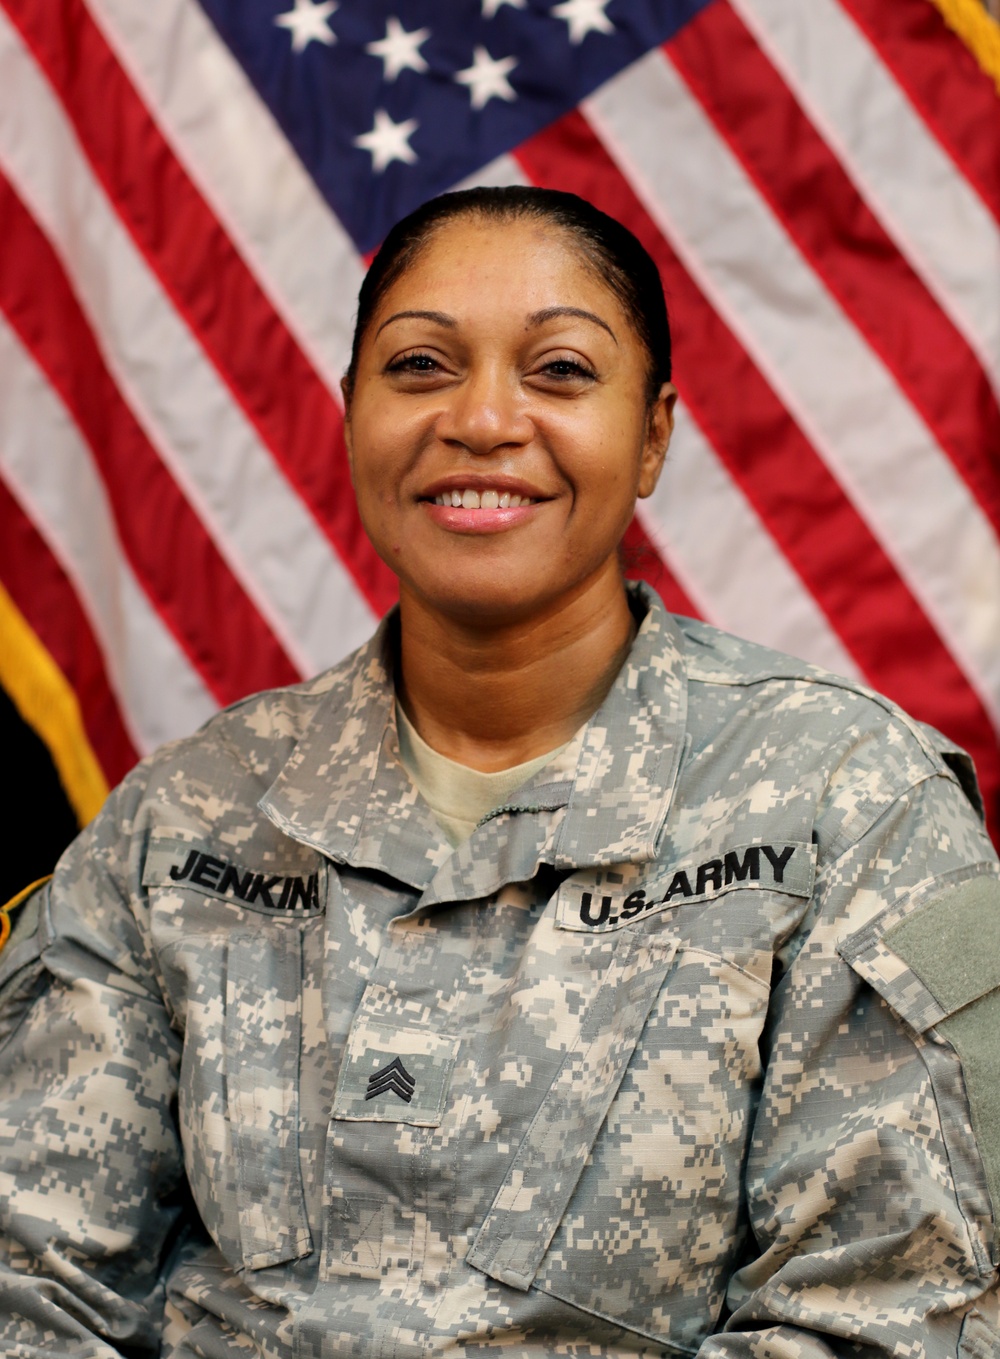 Citizen Soldier helps pave the way for gender equality